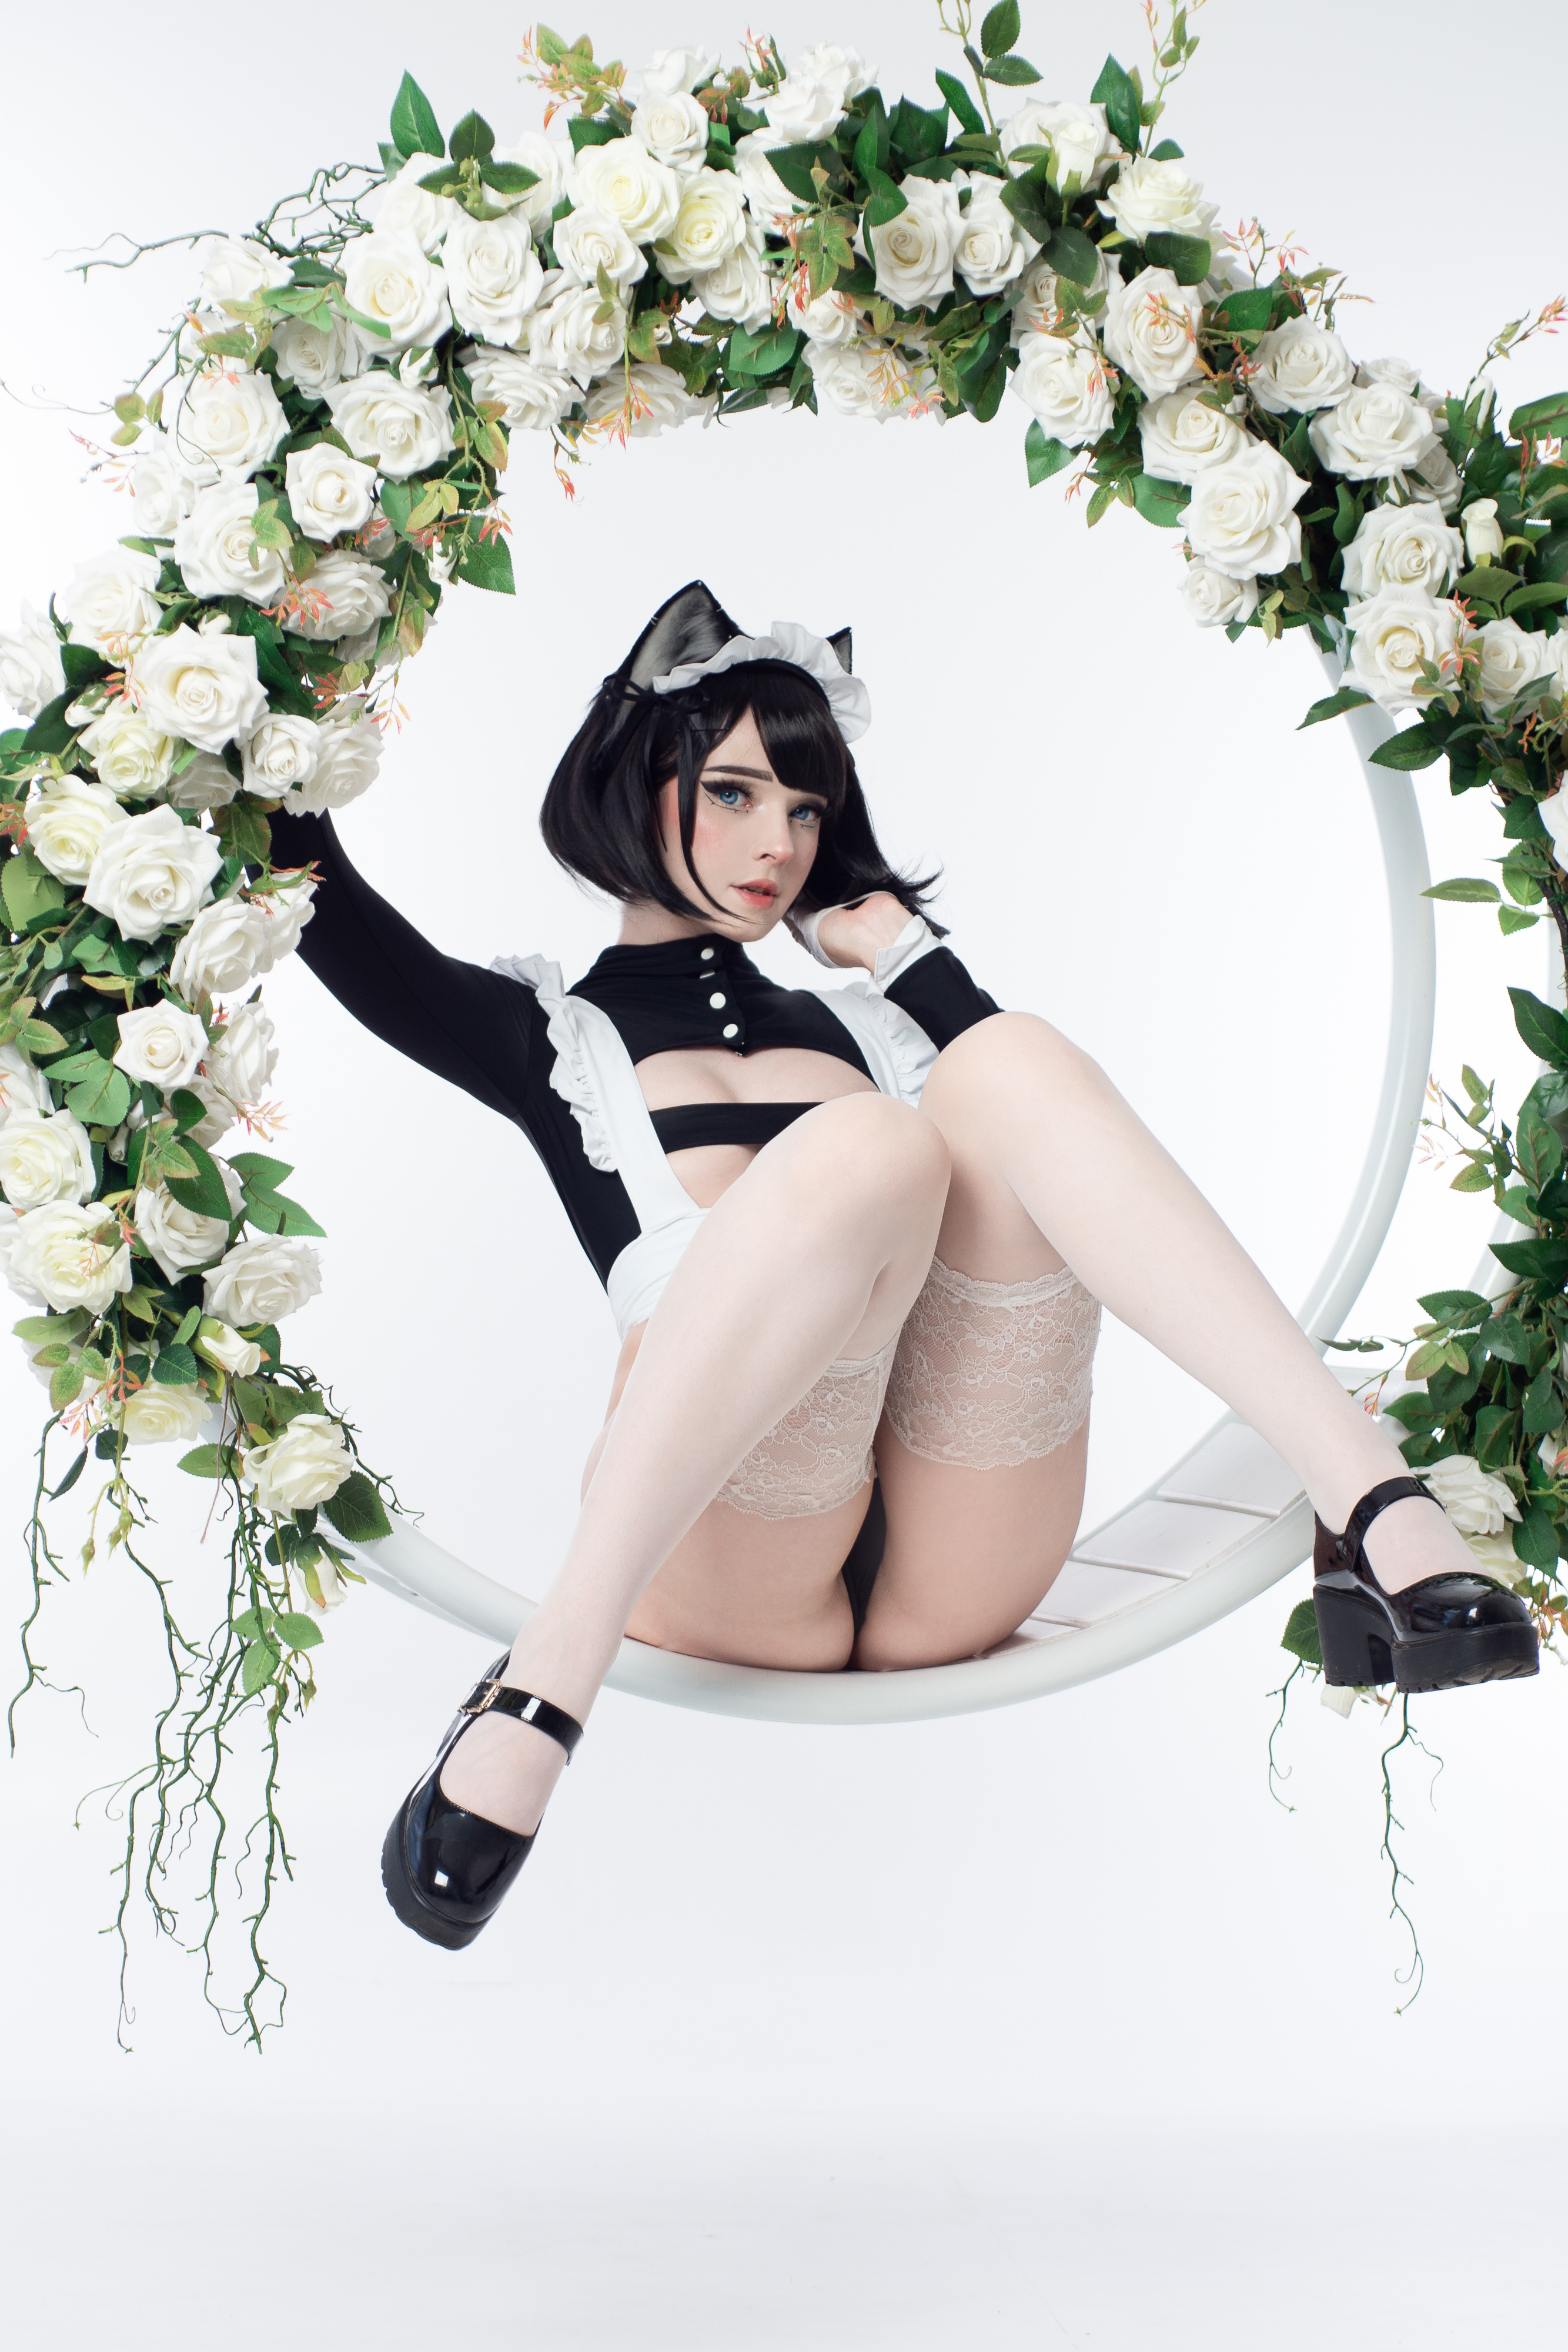 People 2667x4000 Candy Balll women model cosplay maid maid outfit cat girl lingerie stockings white stockings women indoors white background M legs thighs together sitting